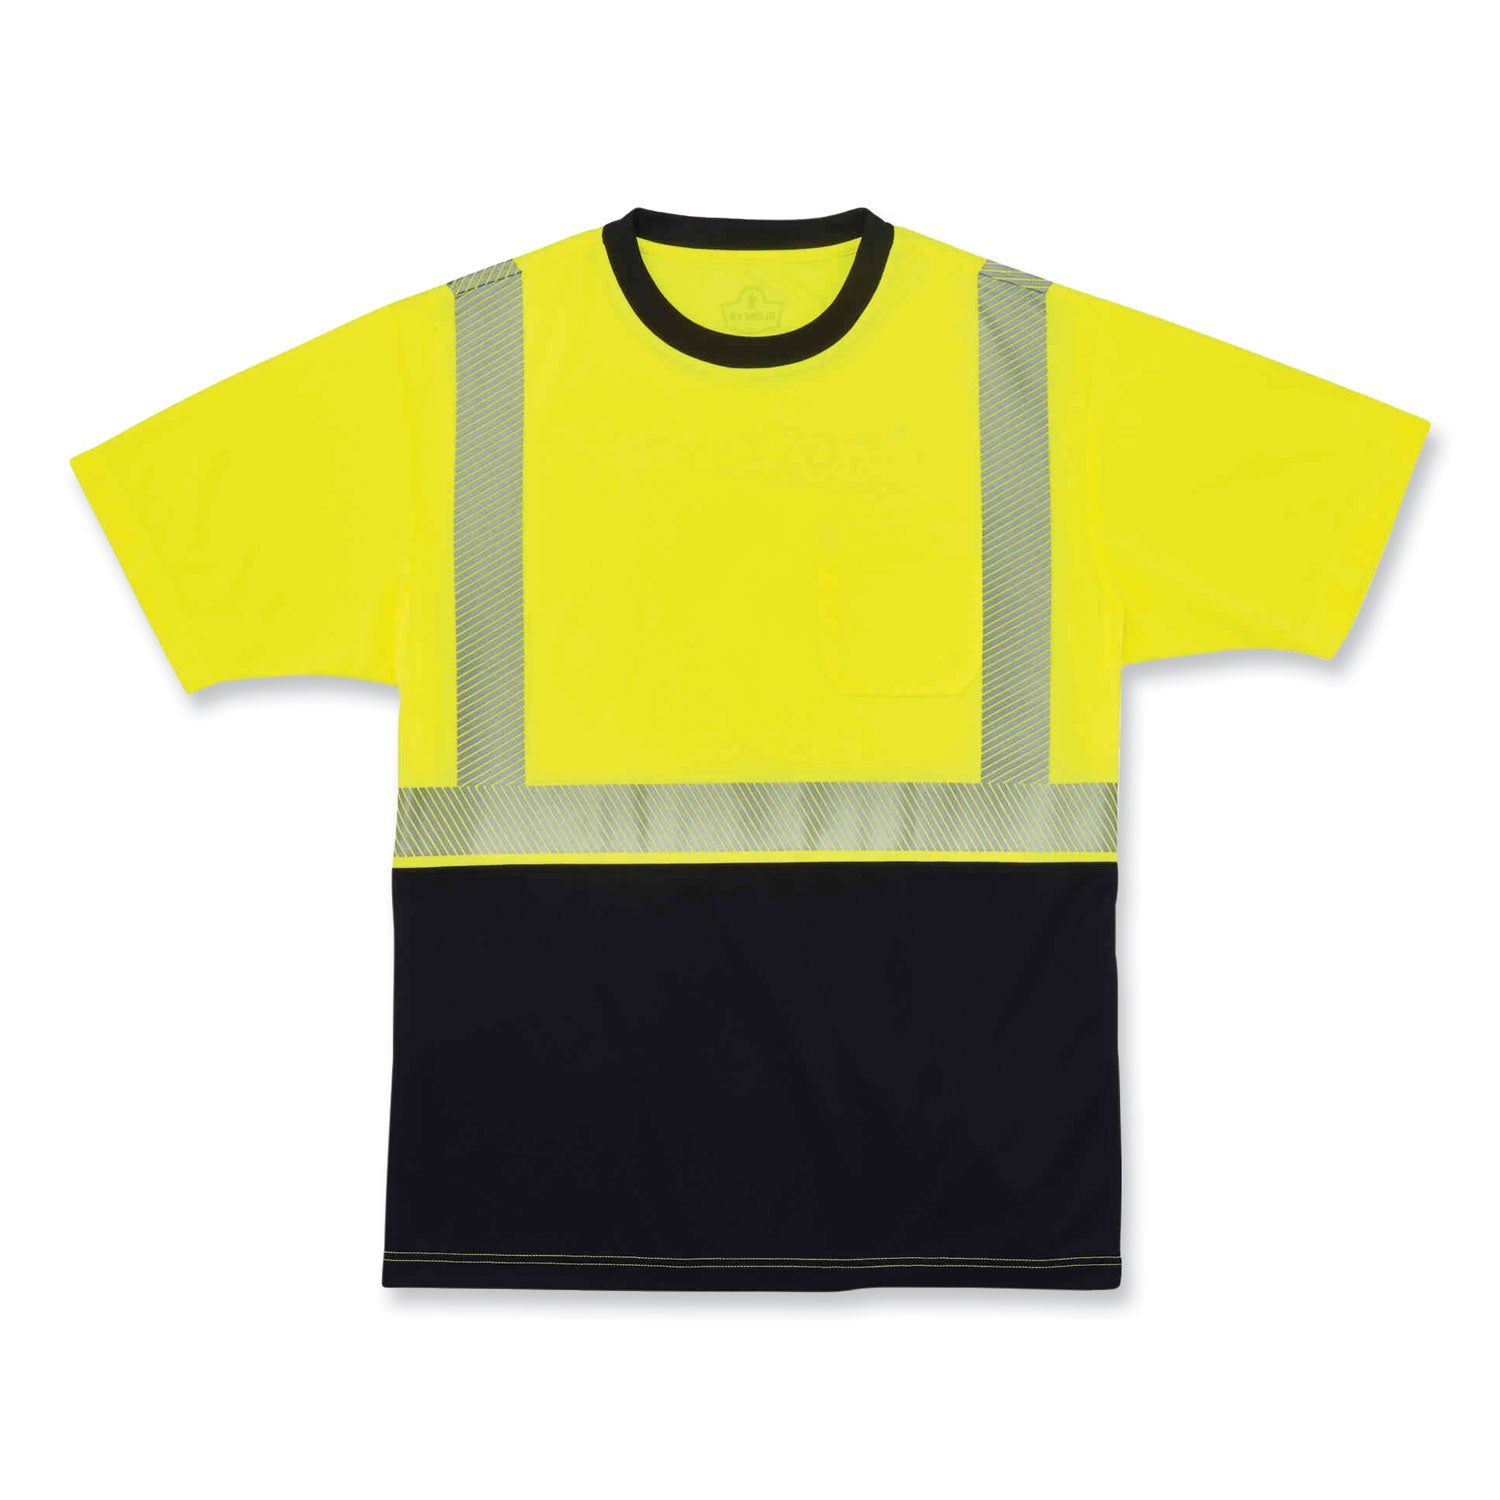 glowear-8280bk-class-2-performance-t-shirt-with-black-bottom-polyester-3x-large-lime-ships-in-1-3-business-days_ego22537 - 1